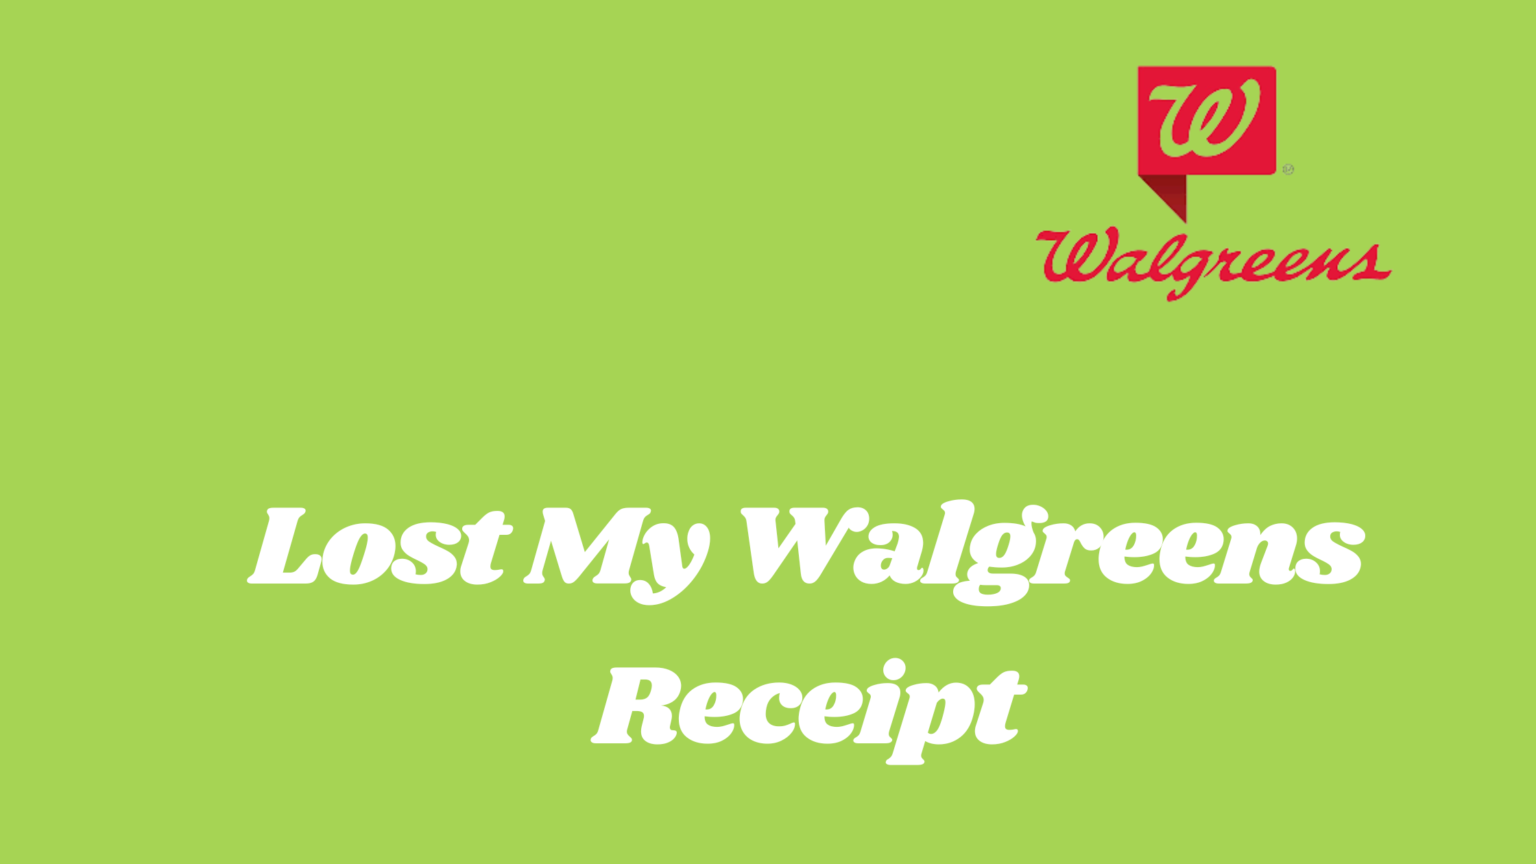 Walgreens Return Policy [2023] Complete Guide HealthNord